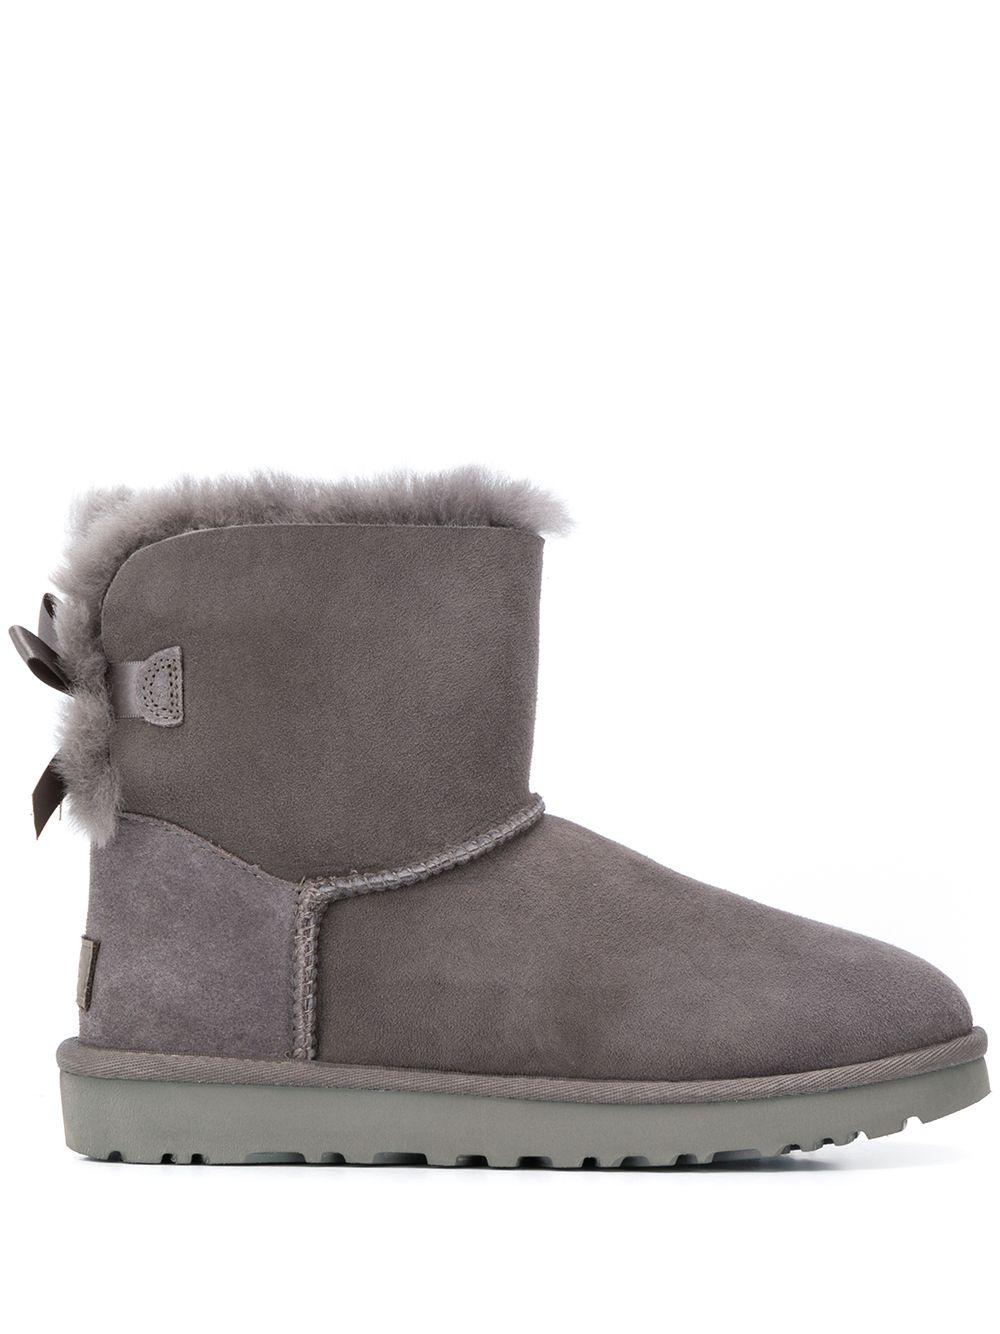 UGG Leather Bow Tie Boots in Grey (Gray) - Lyst